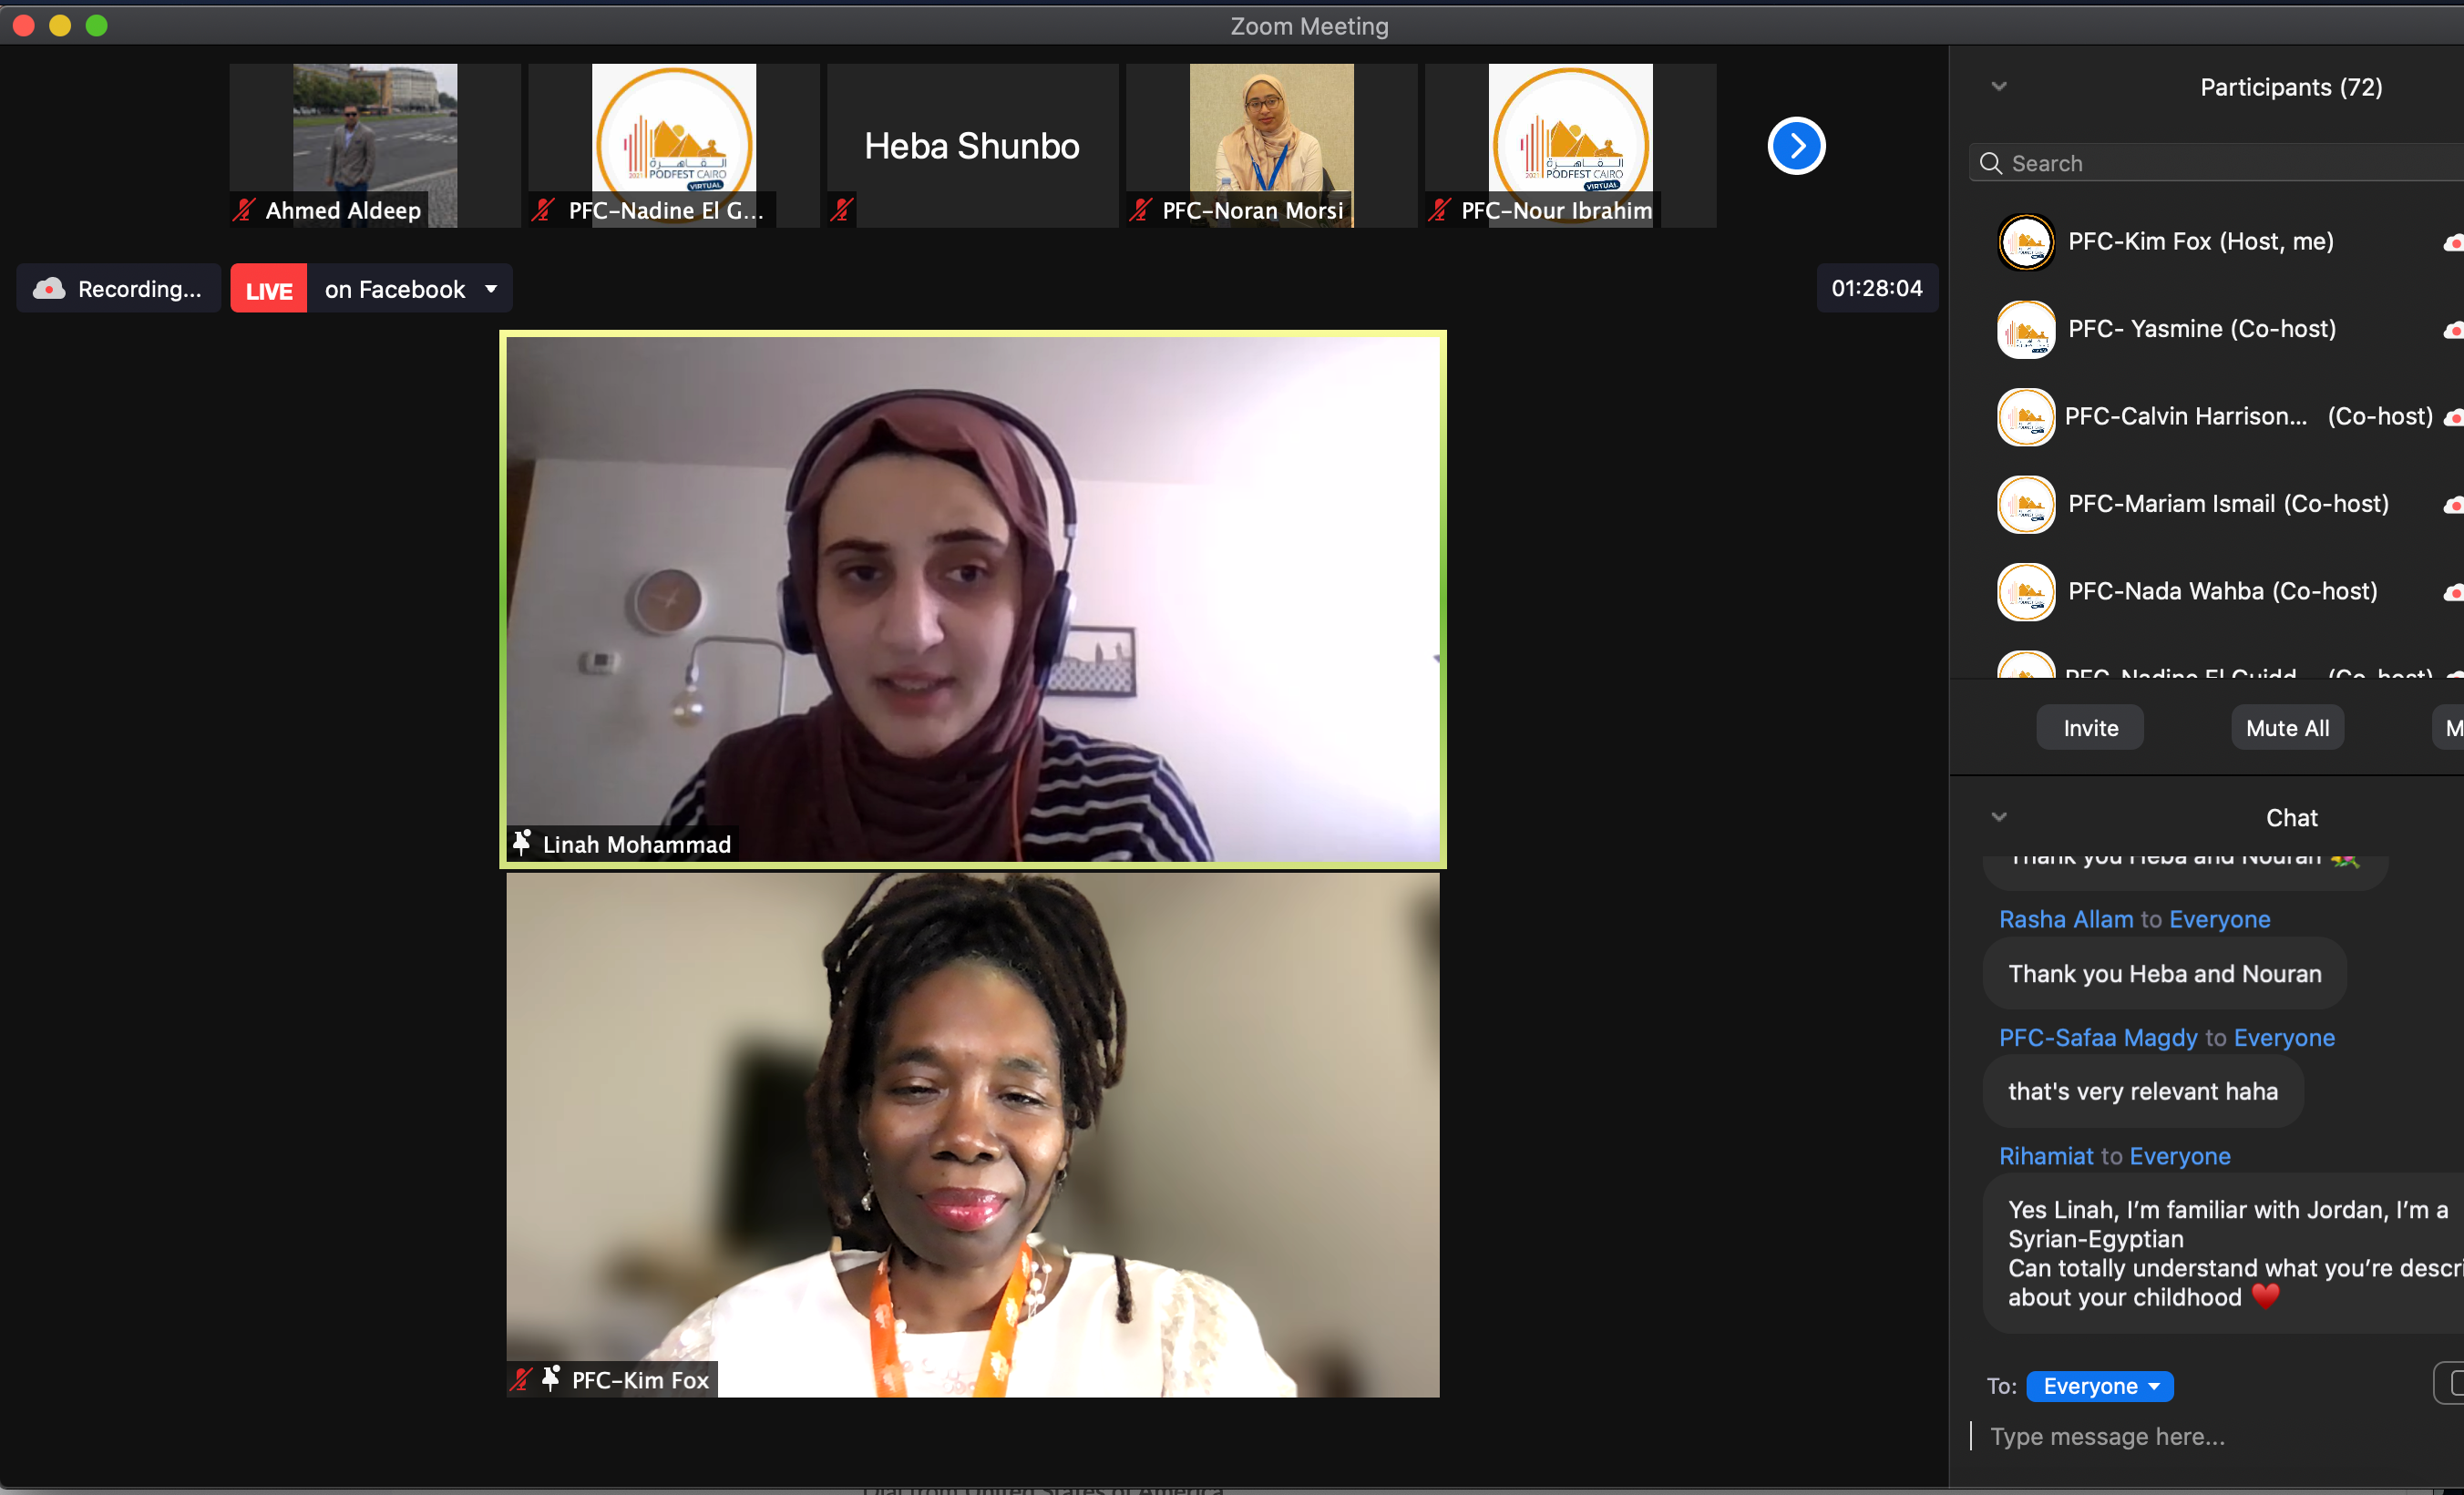 We live chat in Cairo